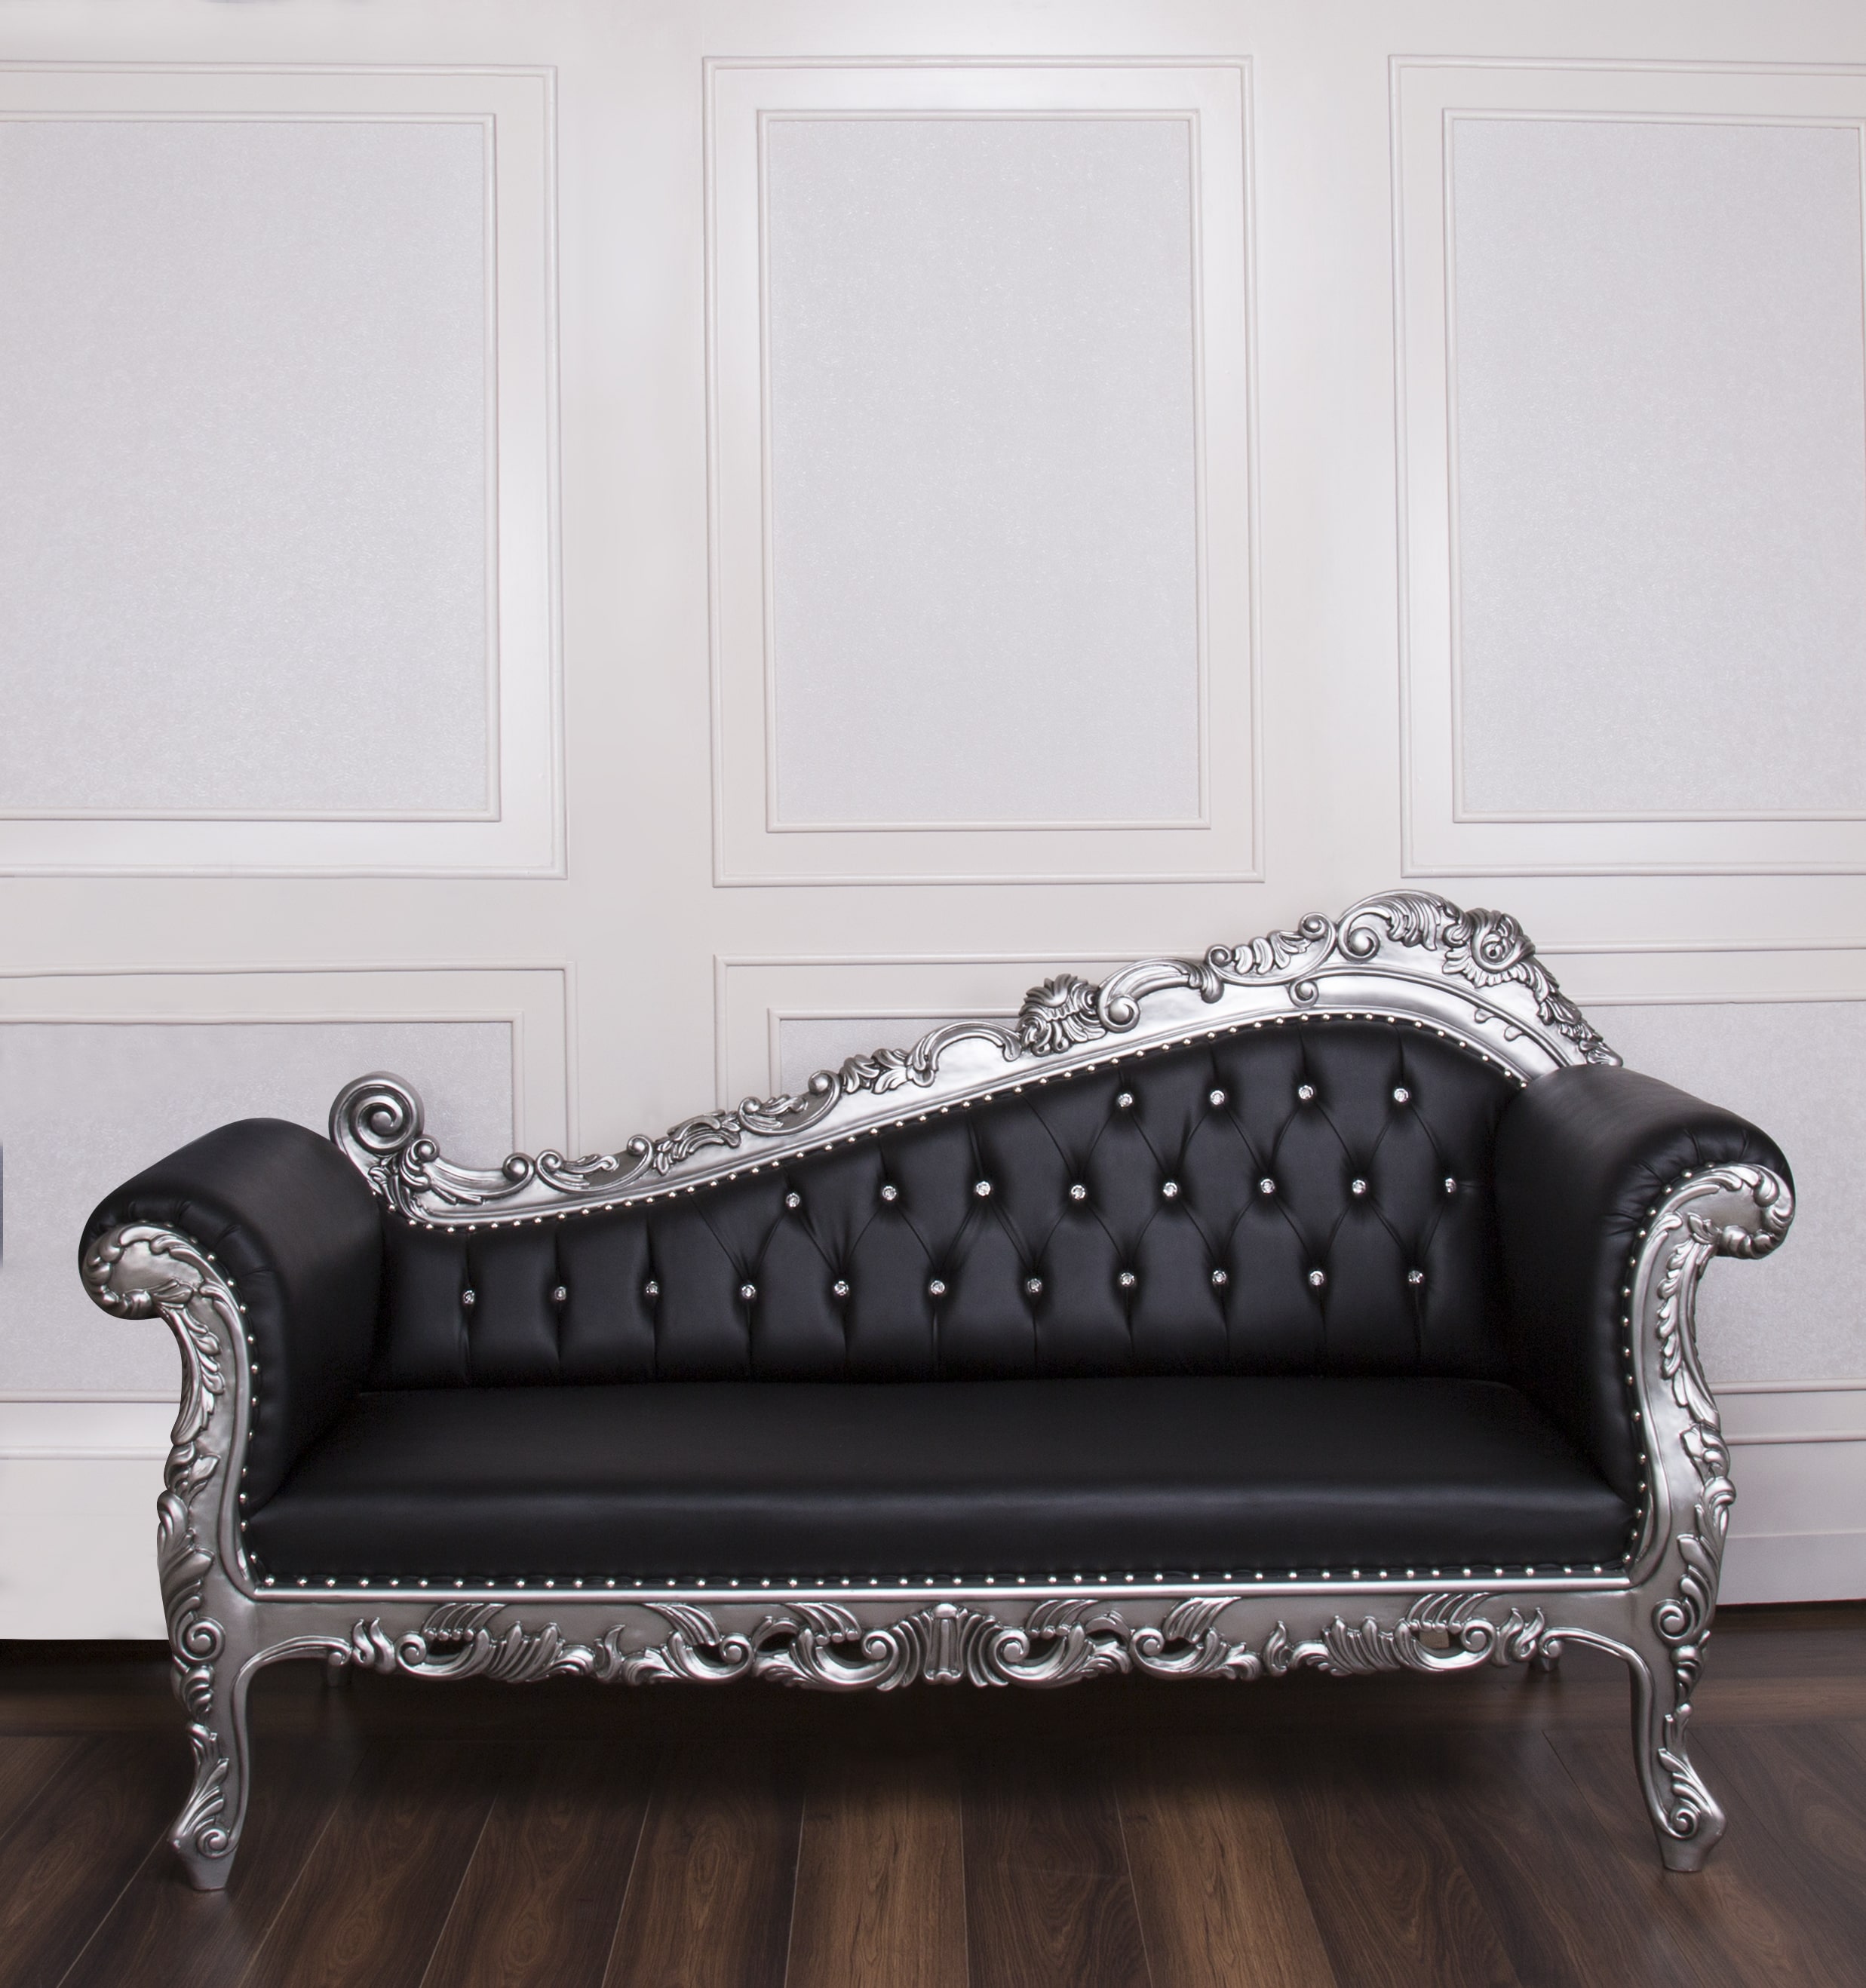 Silver & Black Faux Leather Cleopatra Chaise Lounge